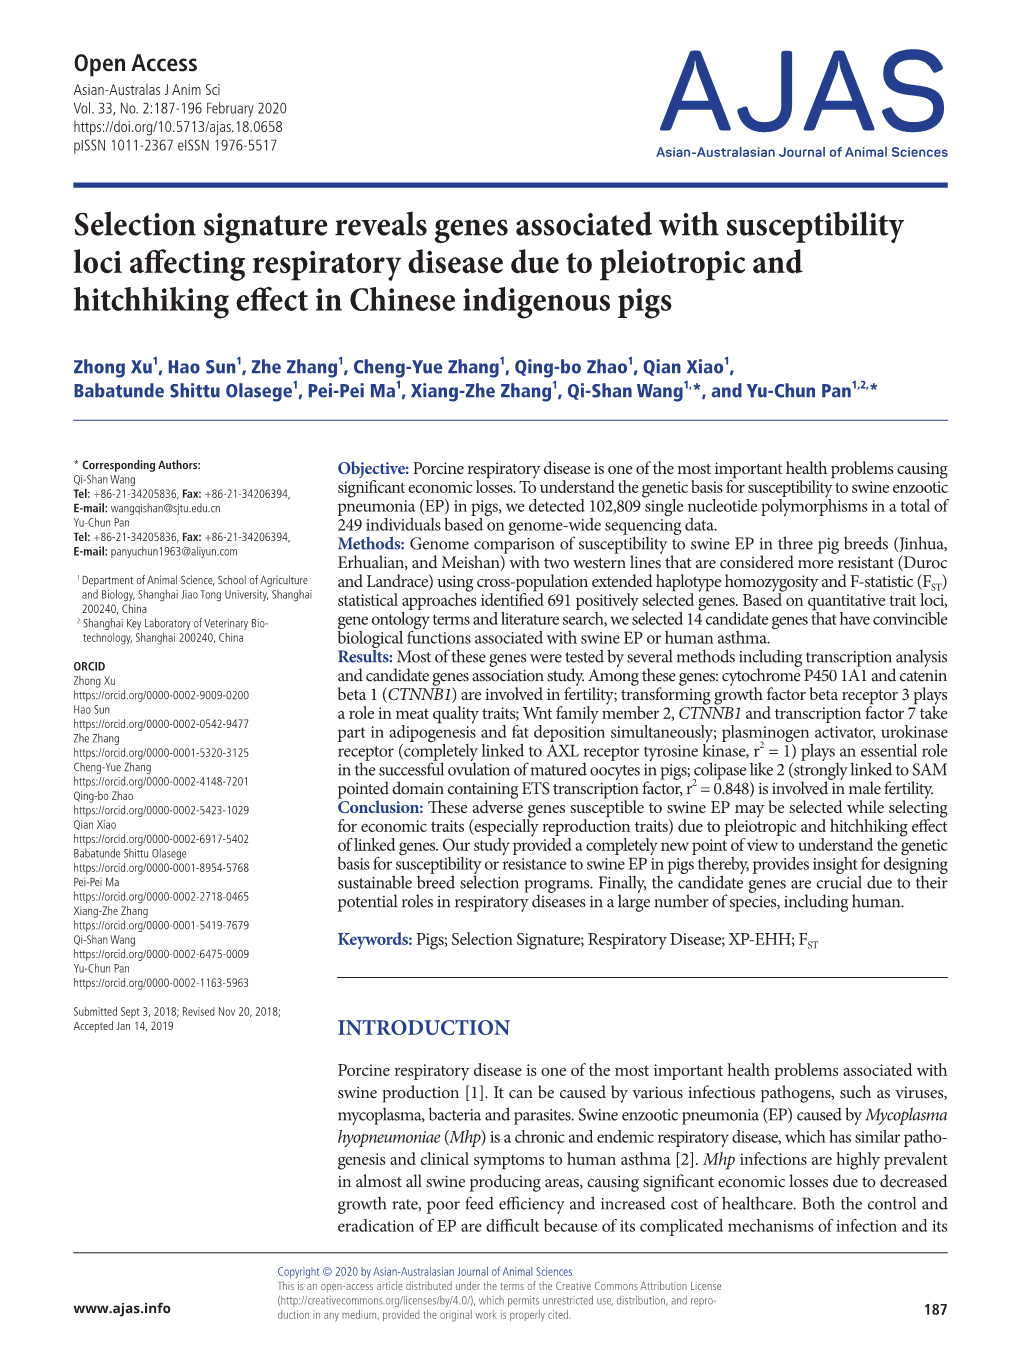 Selection Signature Reveals Genes Associated With